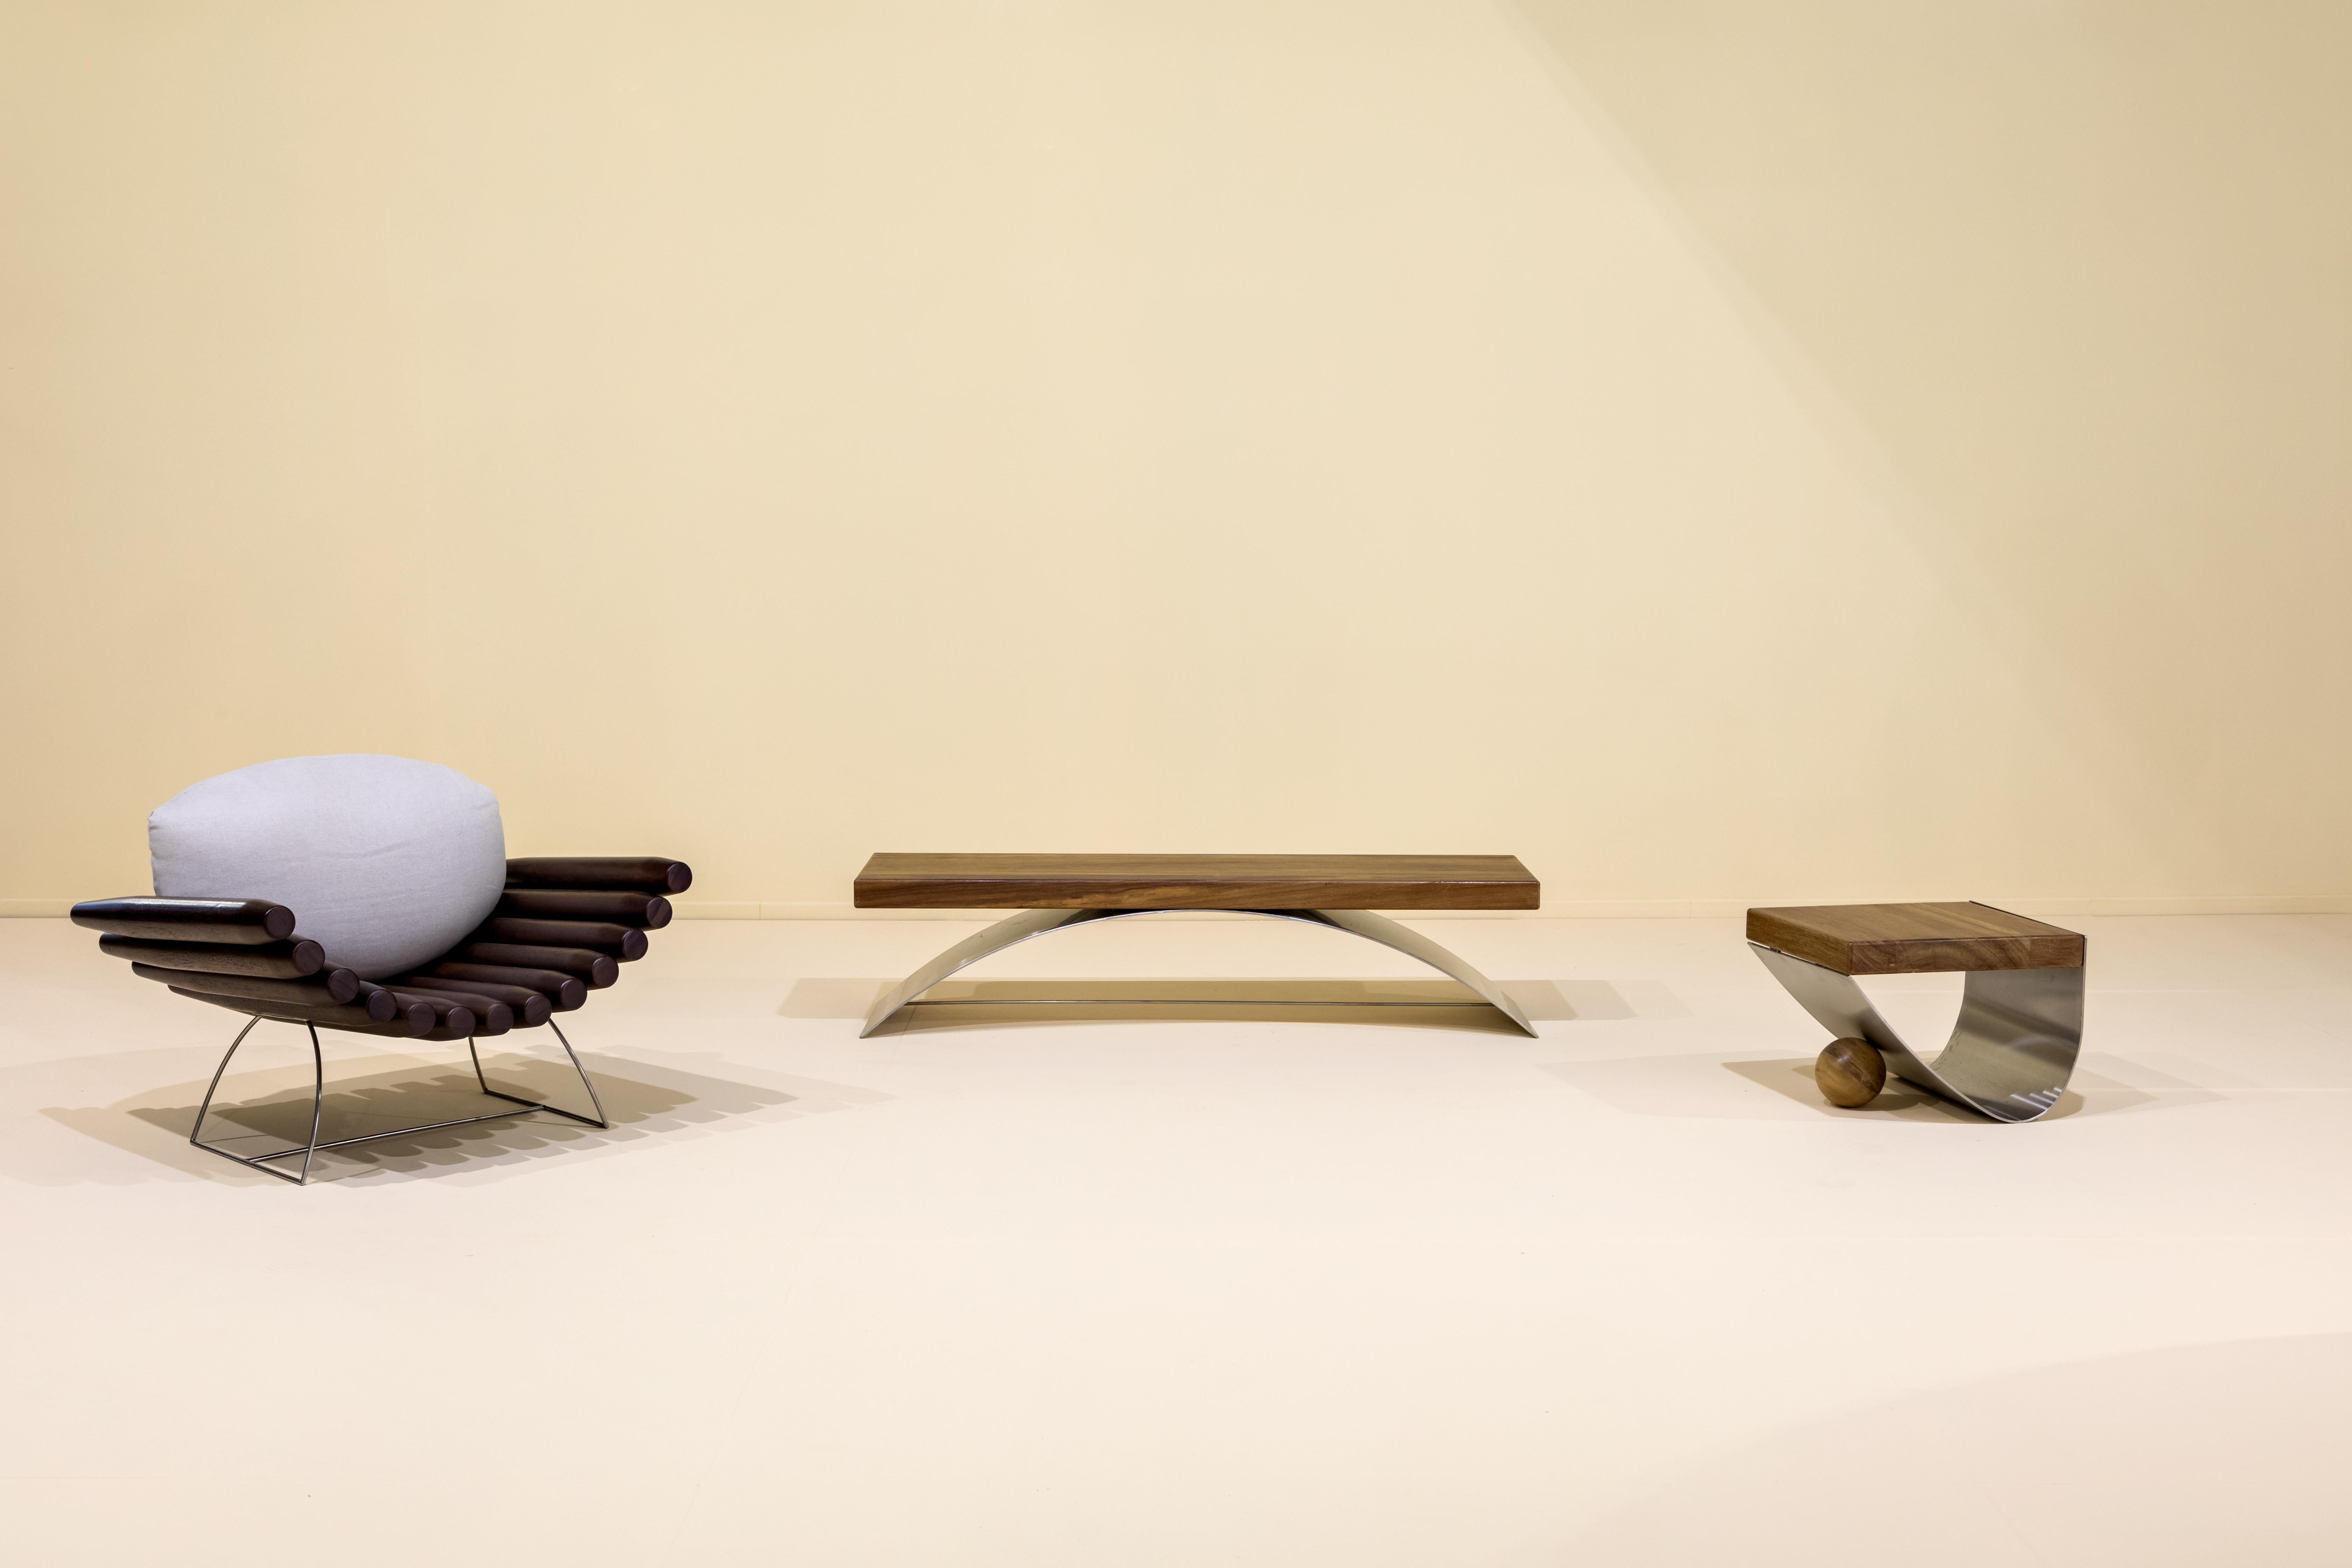 The Balanço Bench was created by the Brazilian contemporary designer Rodrigo Ohtake, in 2019.

The mix of materials is the differential in this series. While wood is used as a seat, a metal plate, thick and curved, raises the first material from the